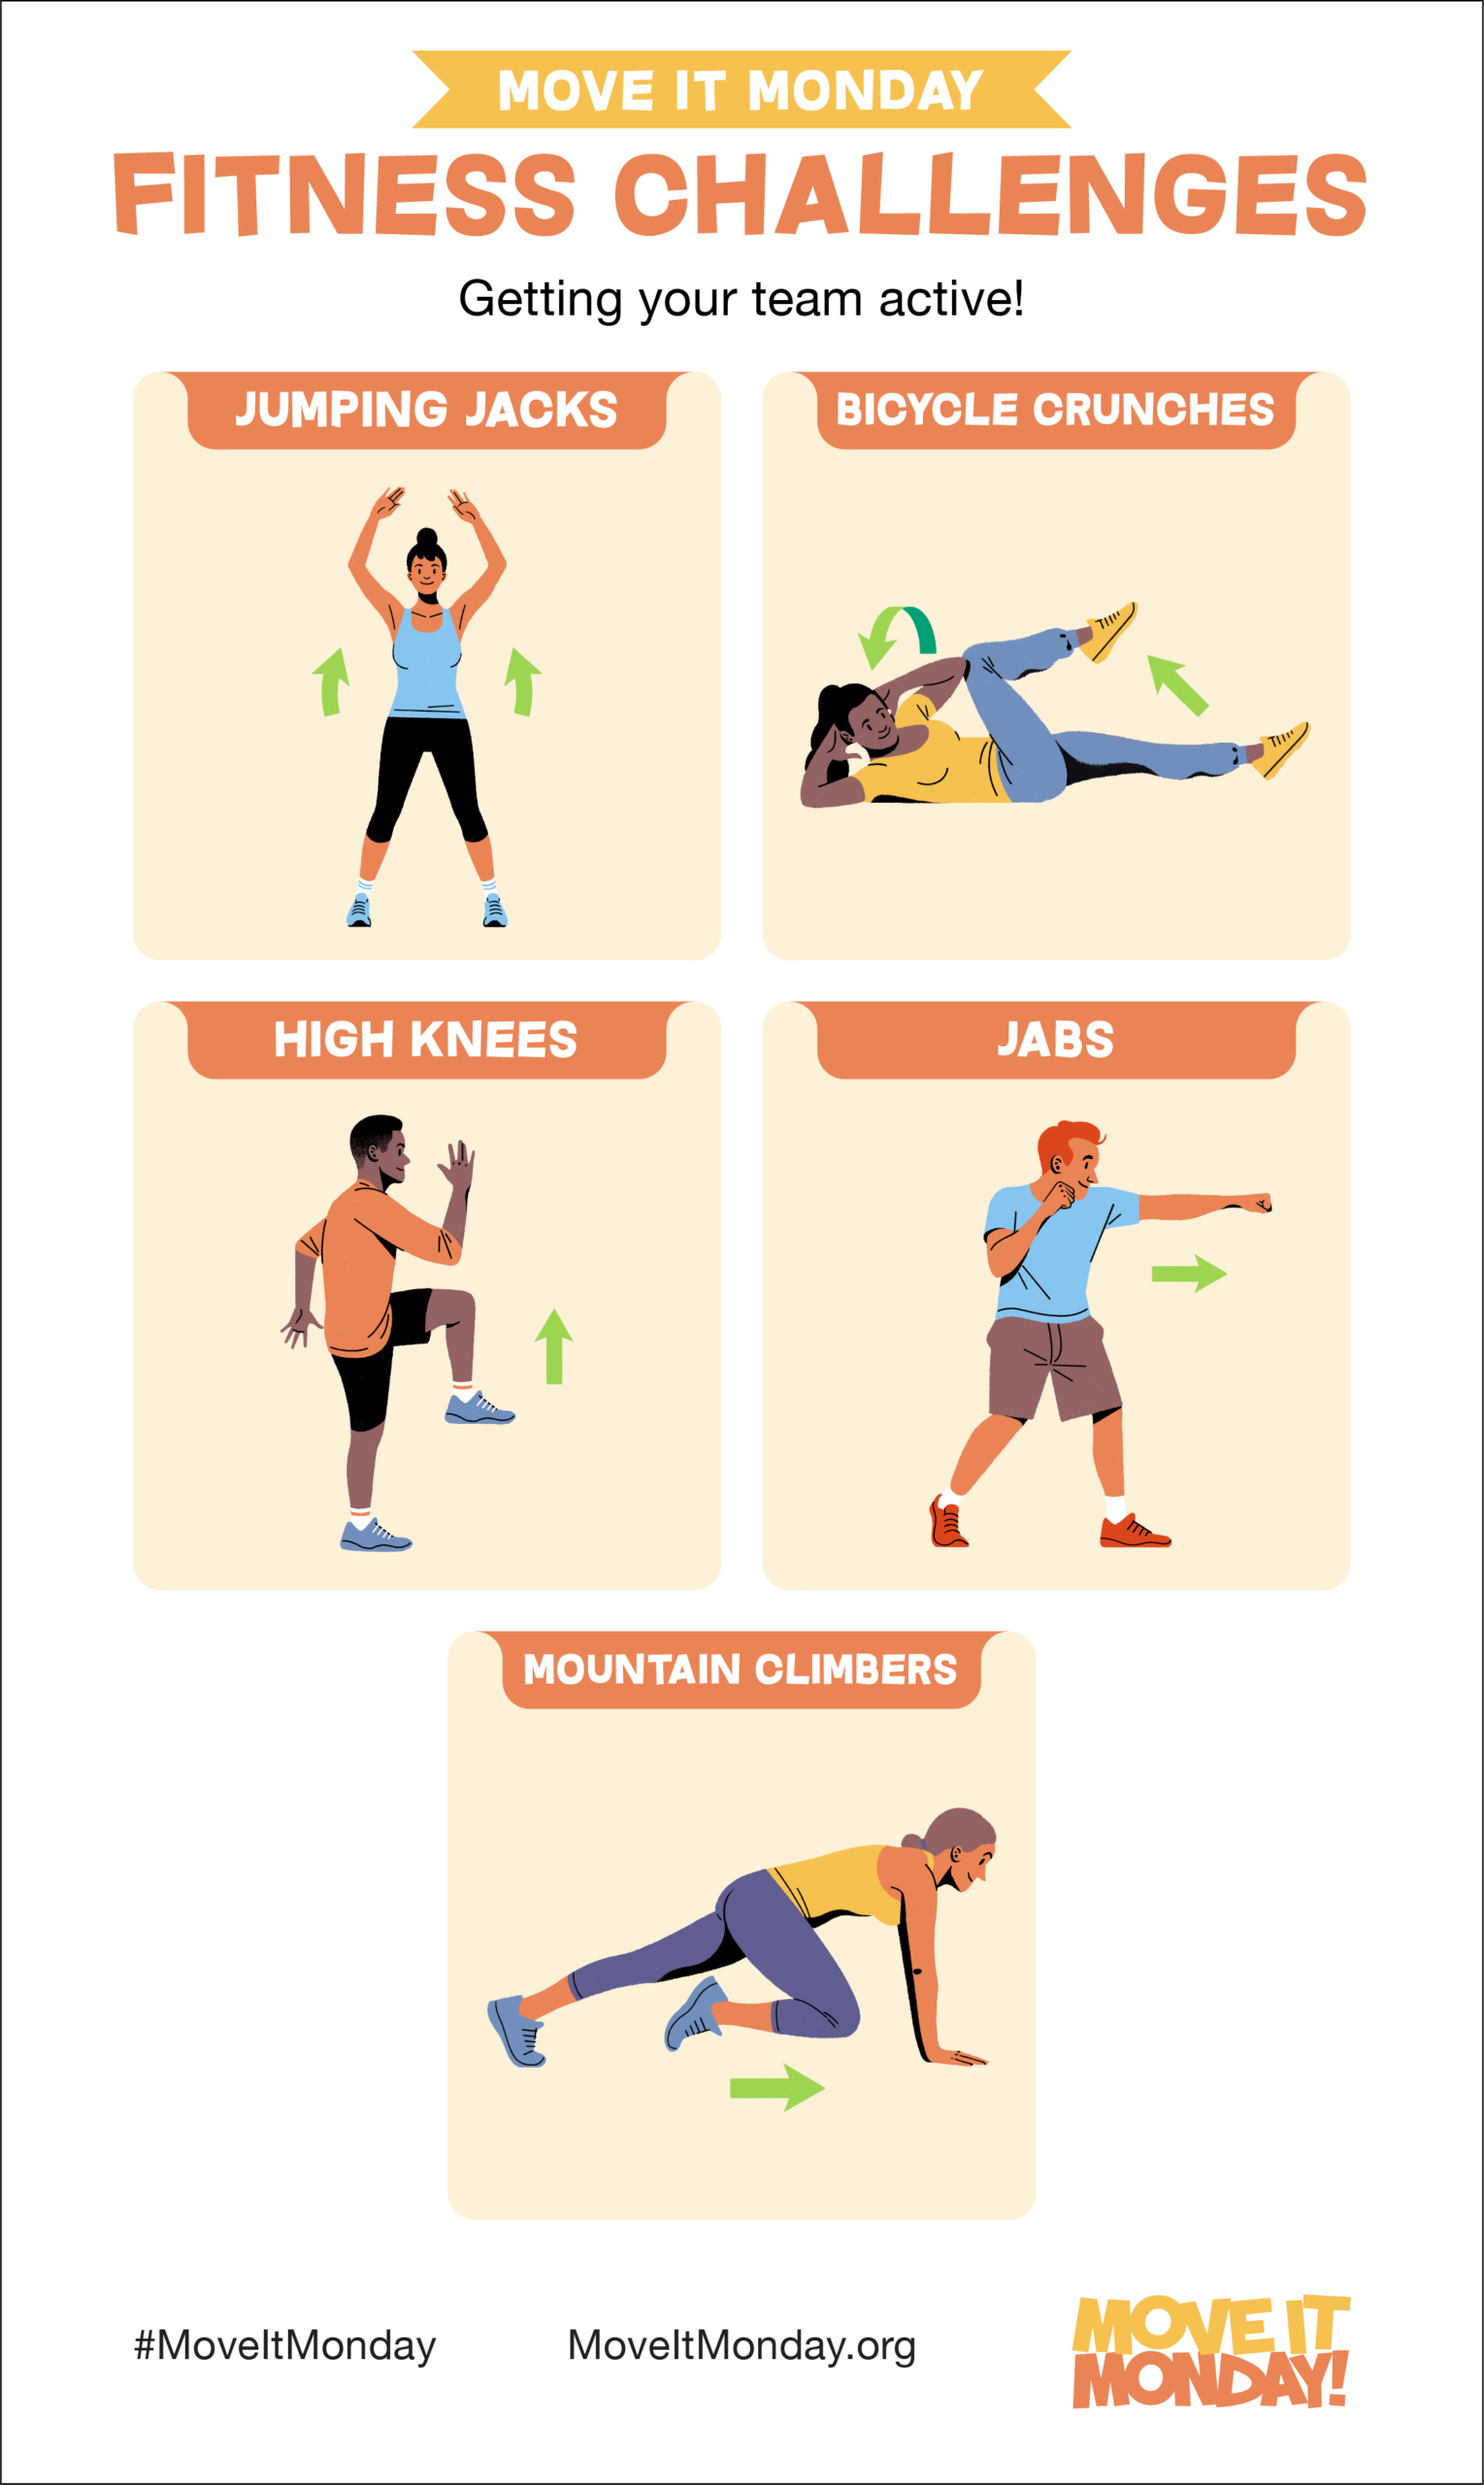 https://www.mondaycampaigns.org/wp-content/uploads/2020/04/move-it-monday-fitness-challenges-infographic.png